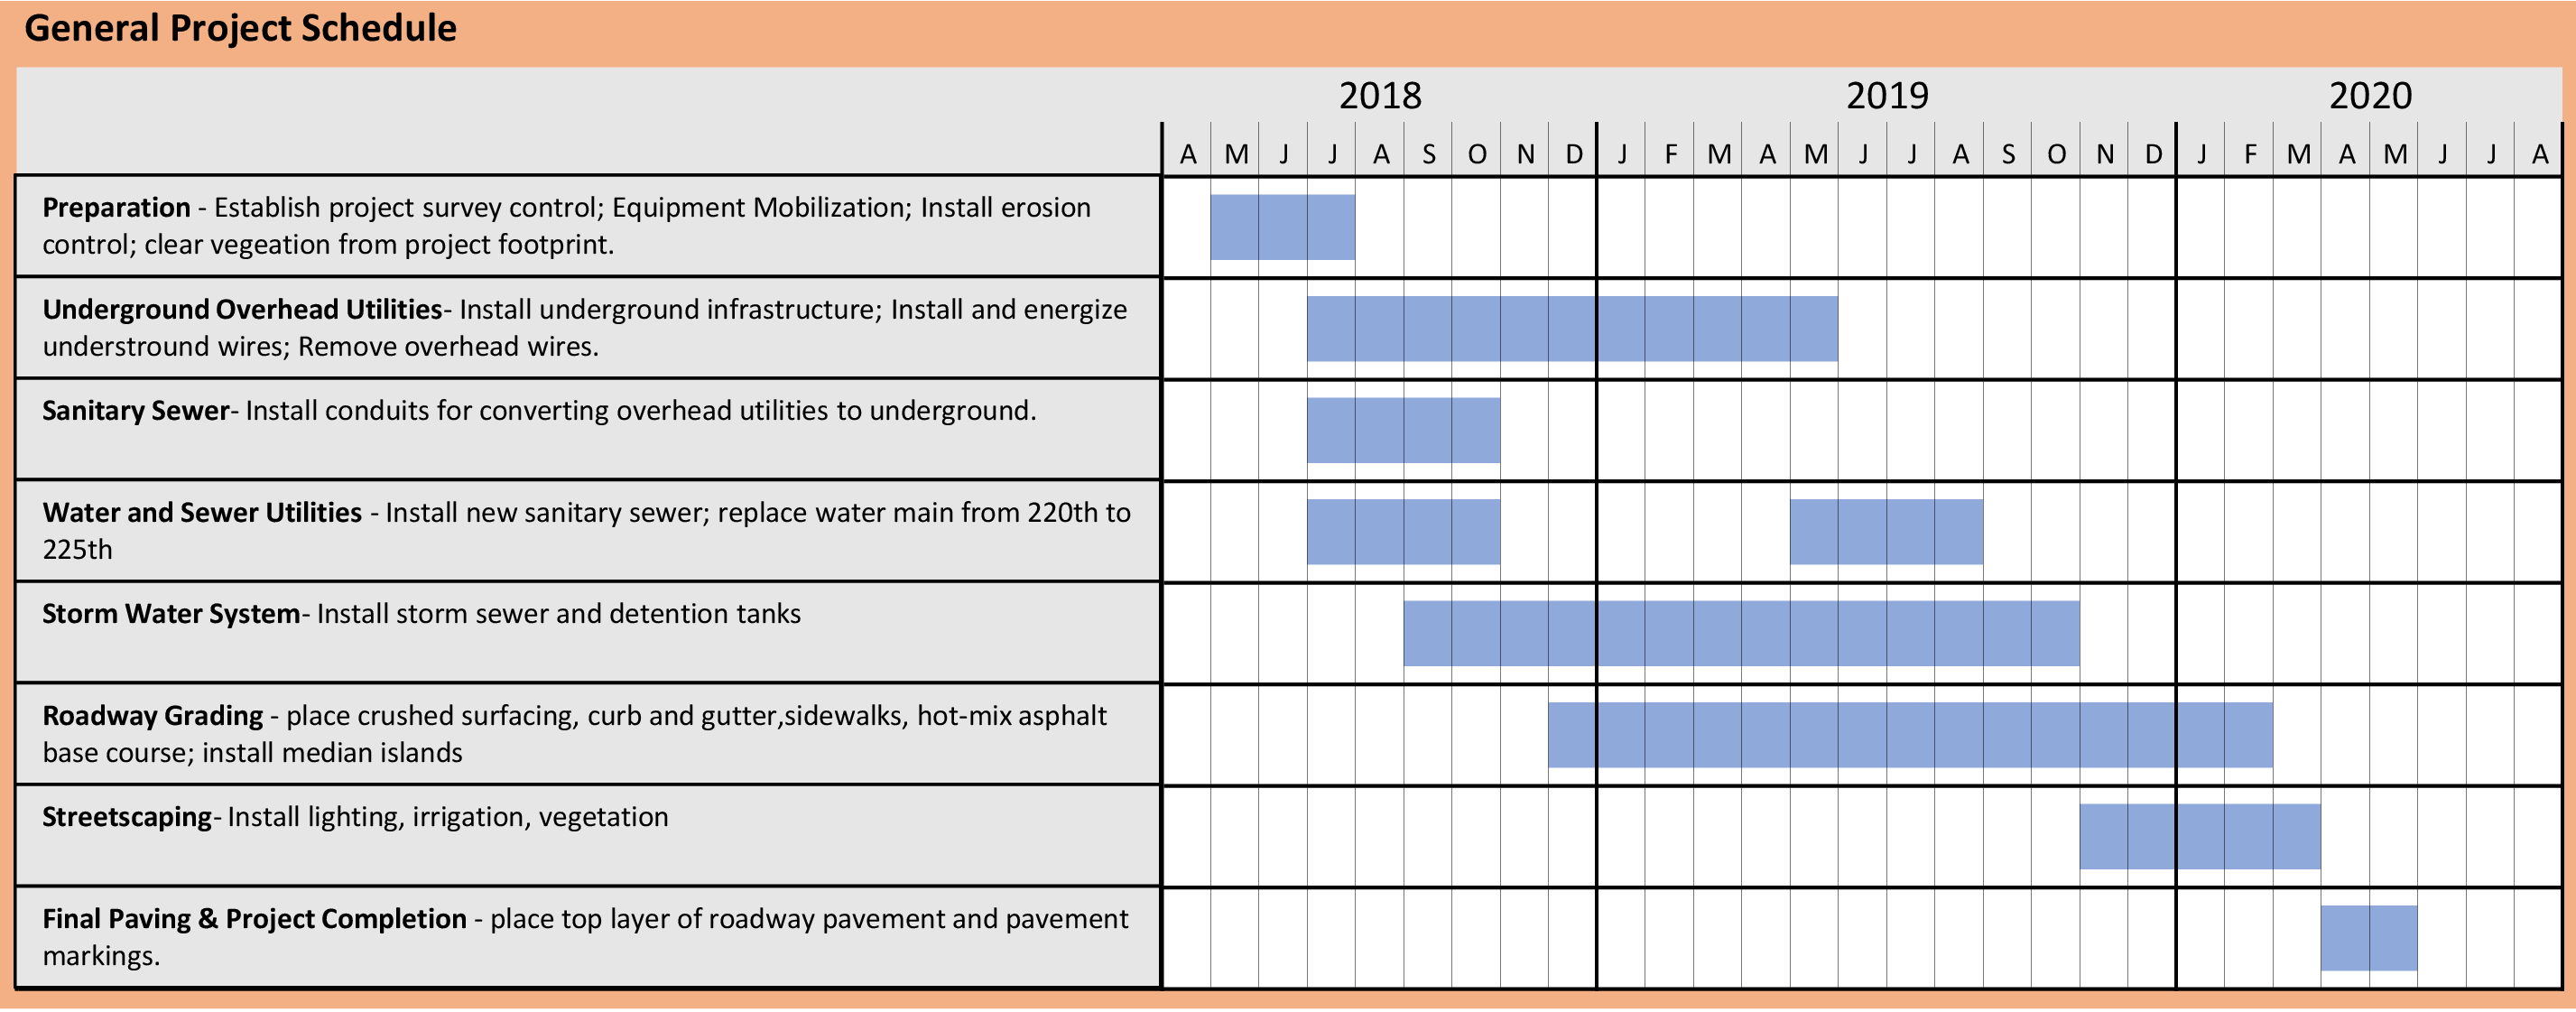 project schedule for SE 4th Street, showing work in eight phases from 2018 through mid 2020